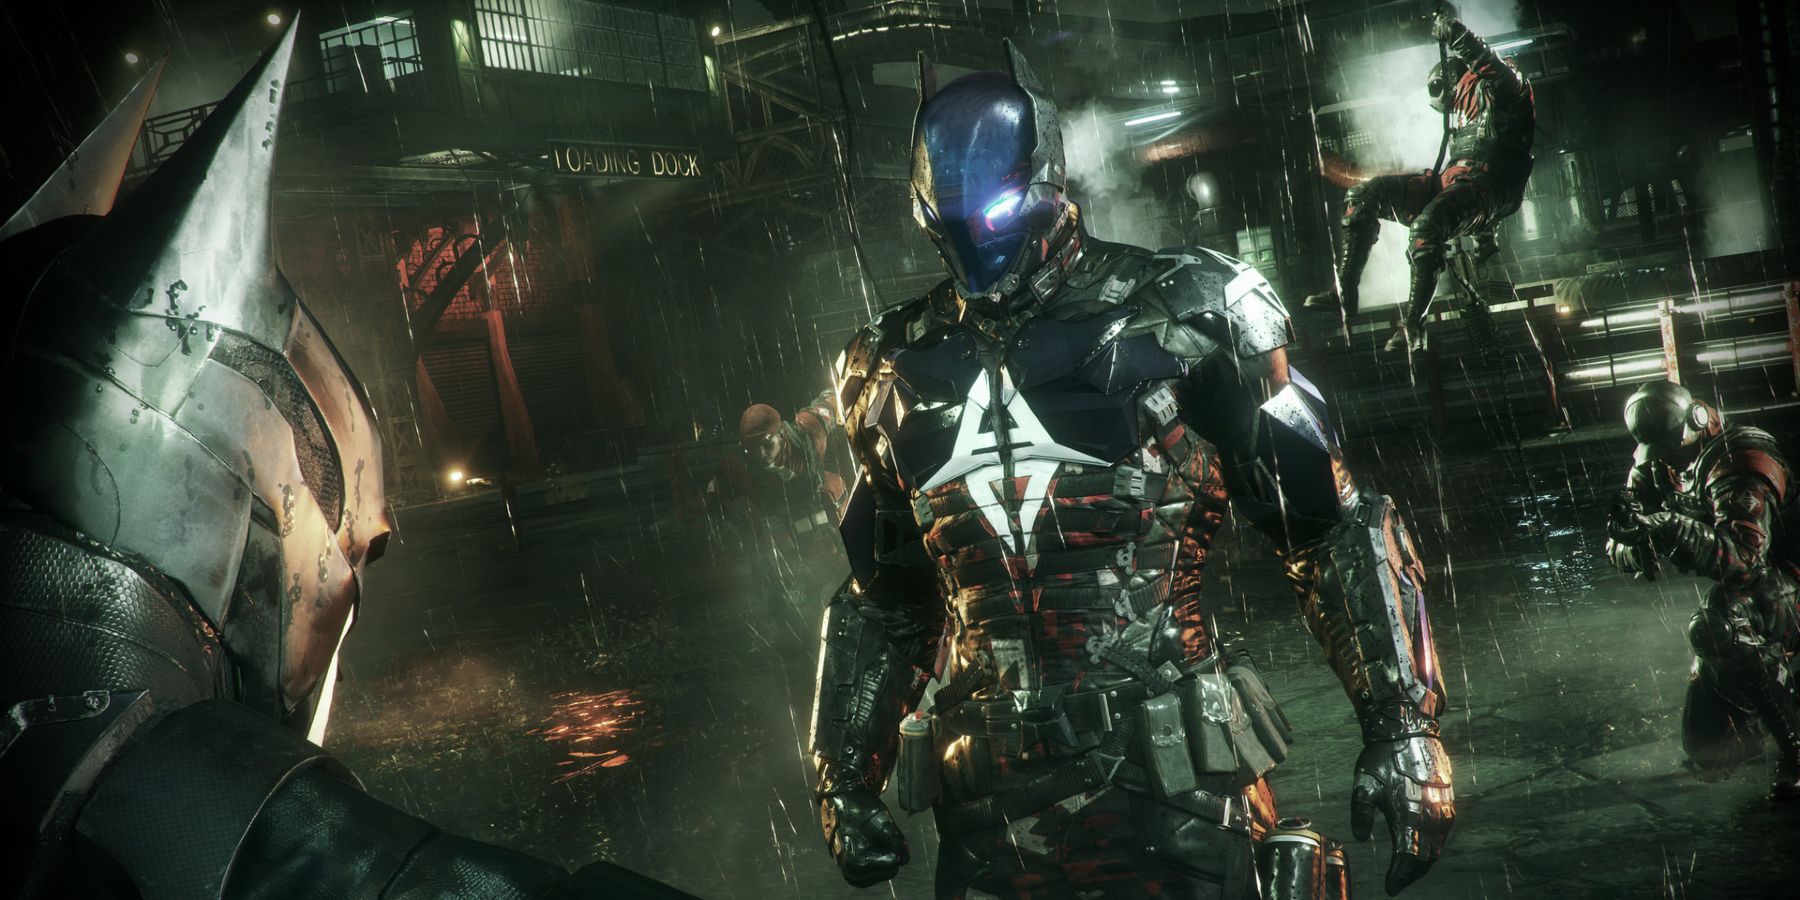 The Arkham Knight faces down Batman as his goons back him up